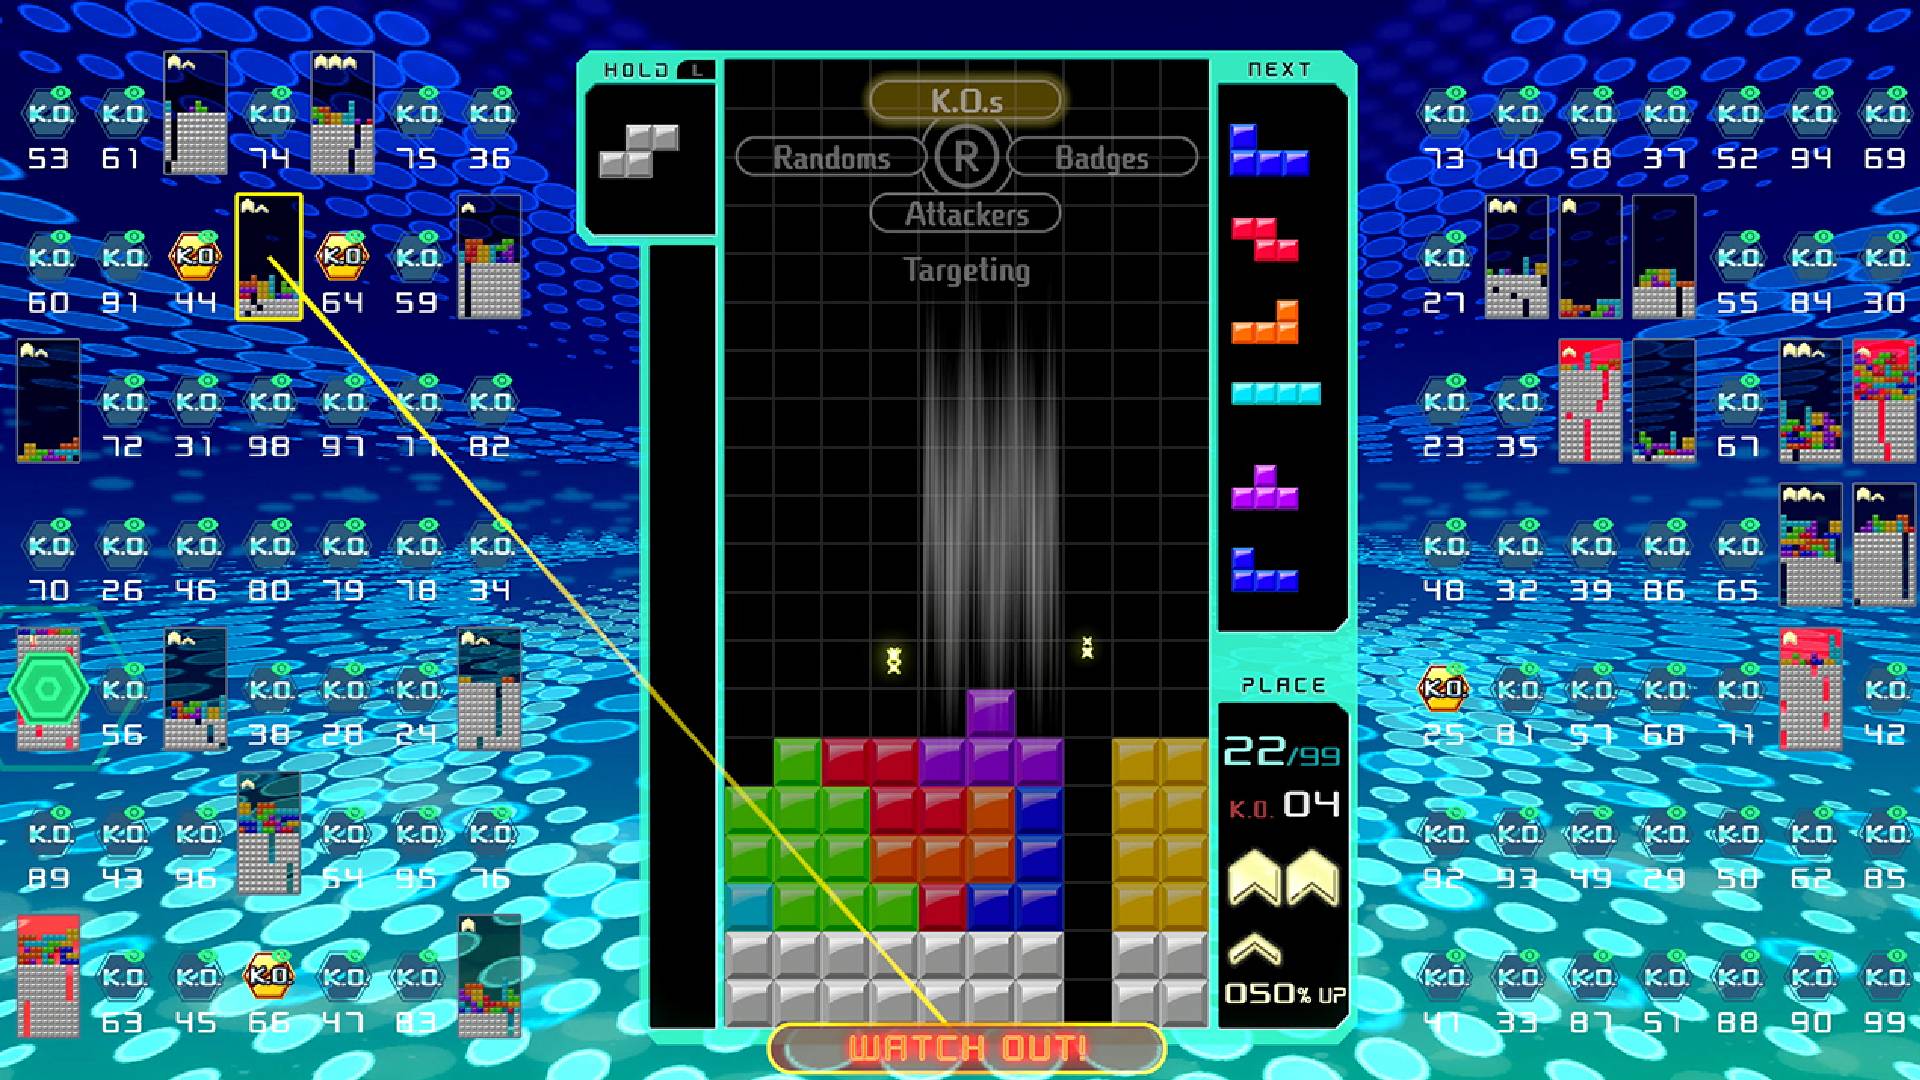 A game of Tetris is being played while 98 other games of Tetris are shown around the main display